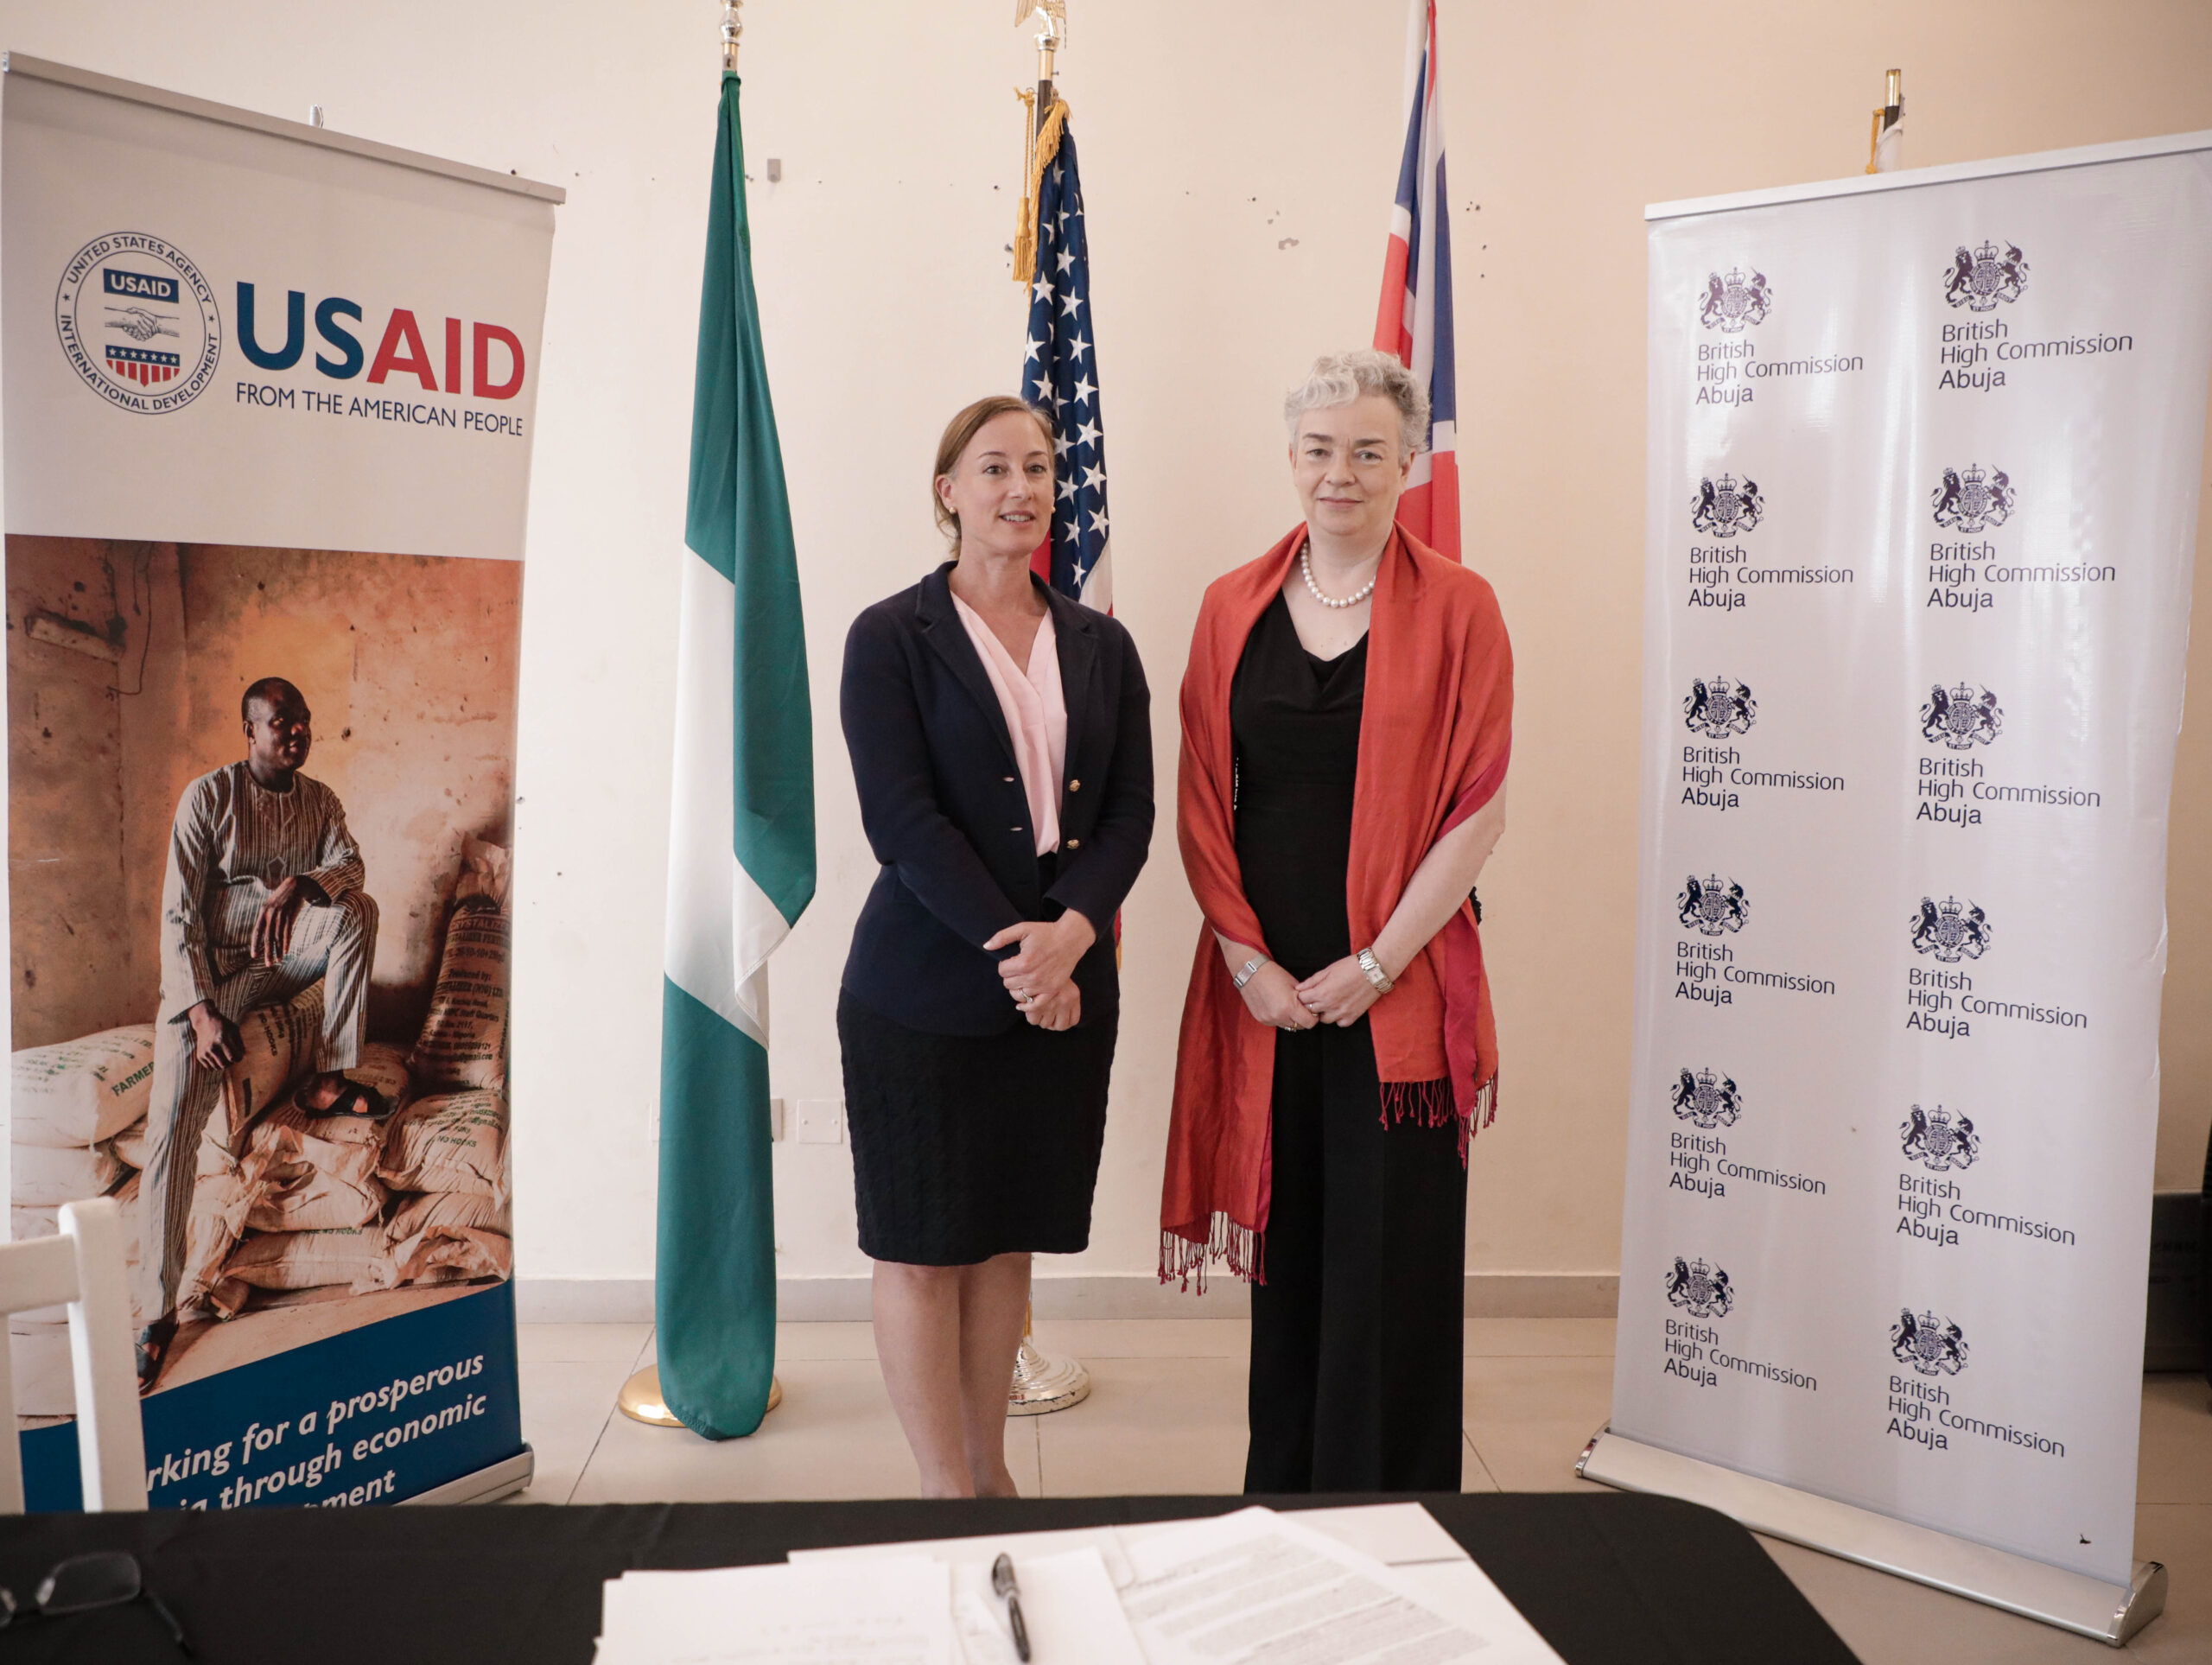 British High Commission and USAID Mark The Start Of 16 Days of Activism With ‘Women on The Frontline - Tackling Gender Based Violence’ Roundtable